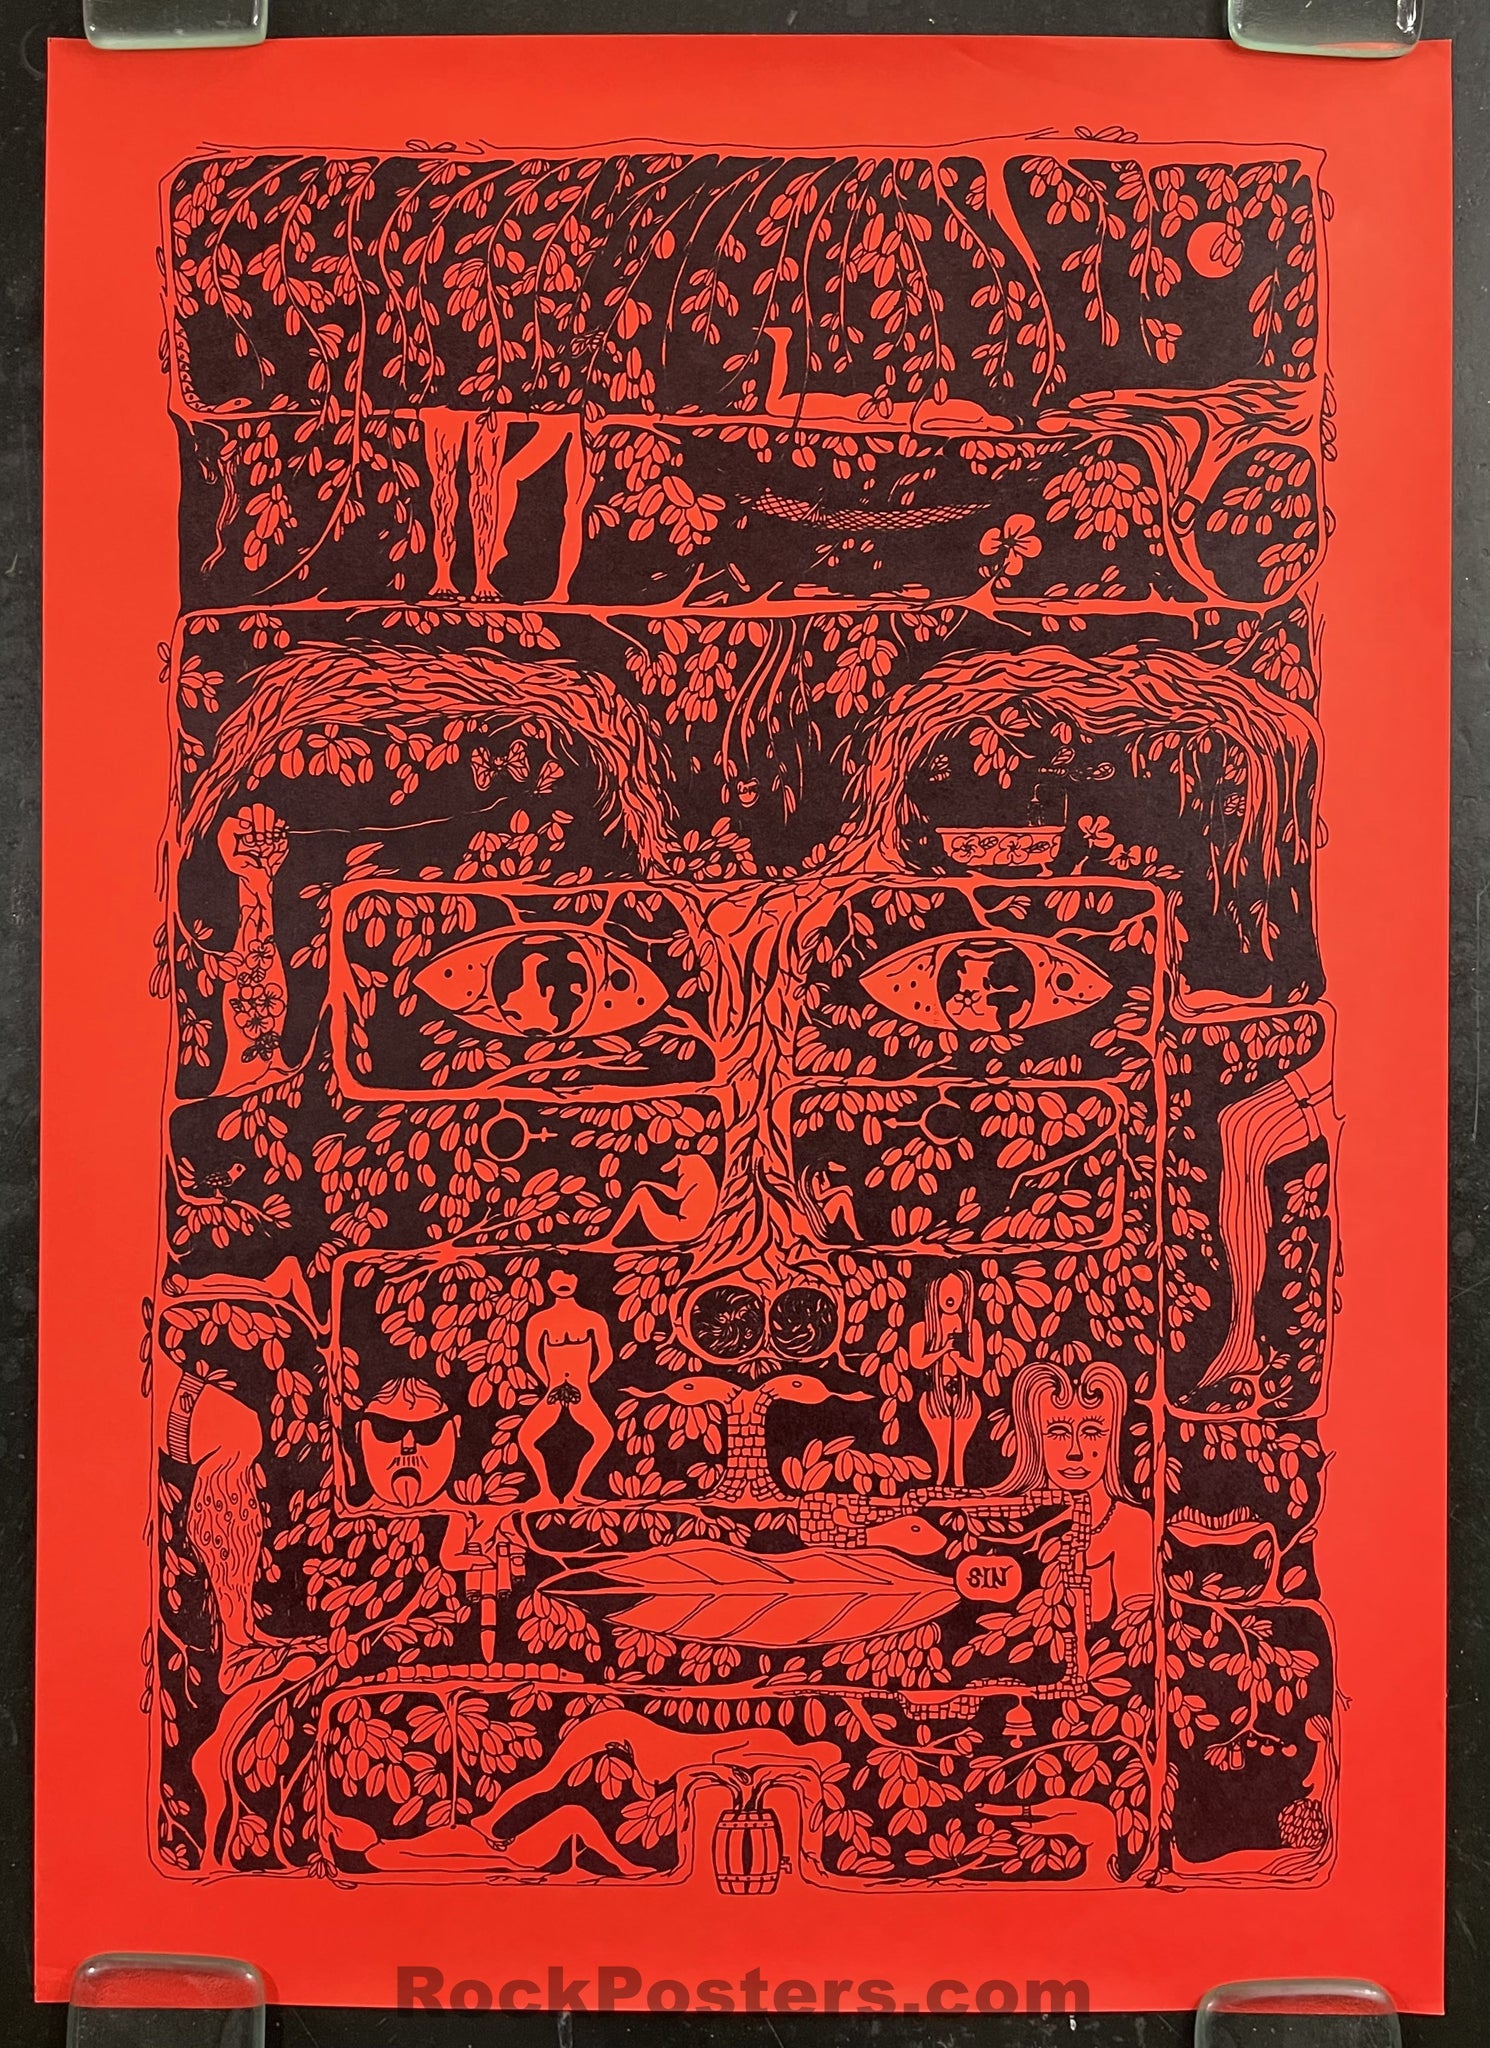 AUCTION - Psychedelic - Late 1960's - Head Shop Poster - Near Mint Minus